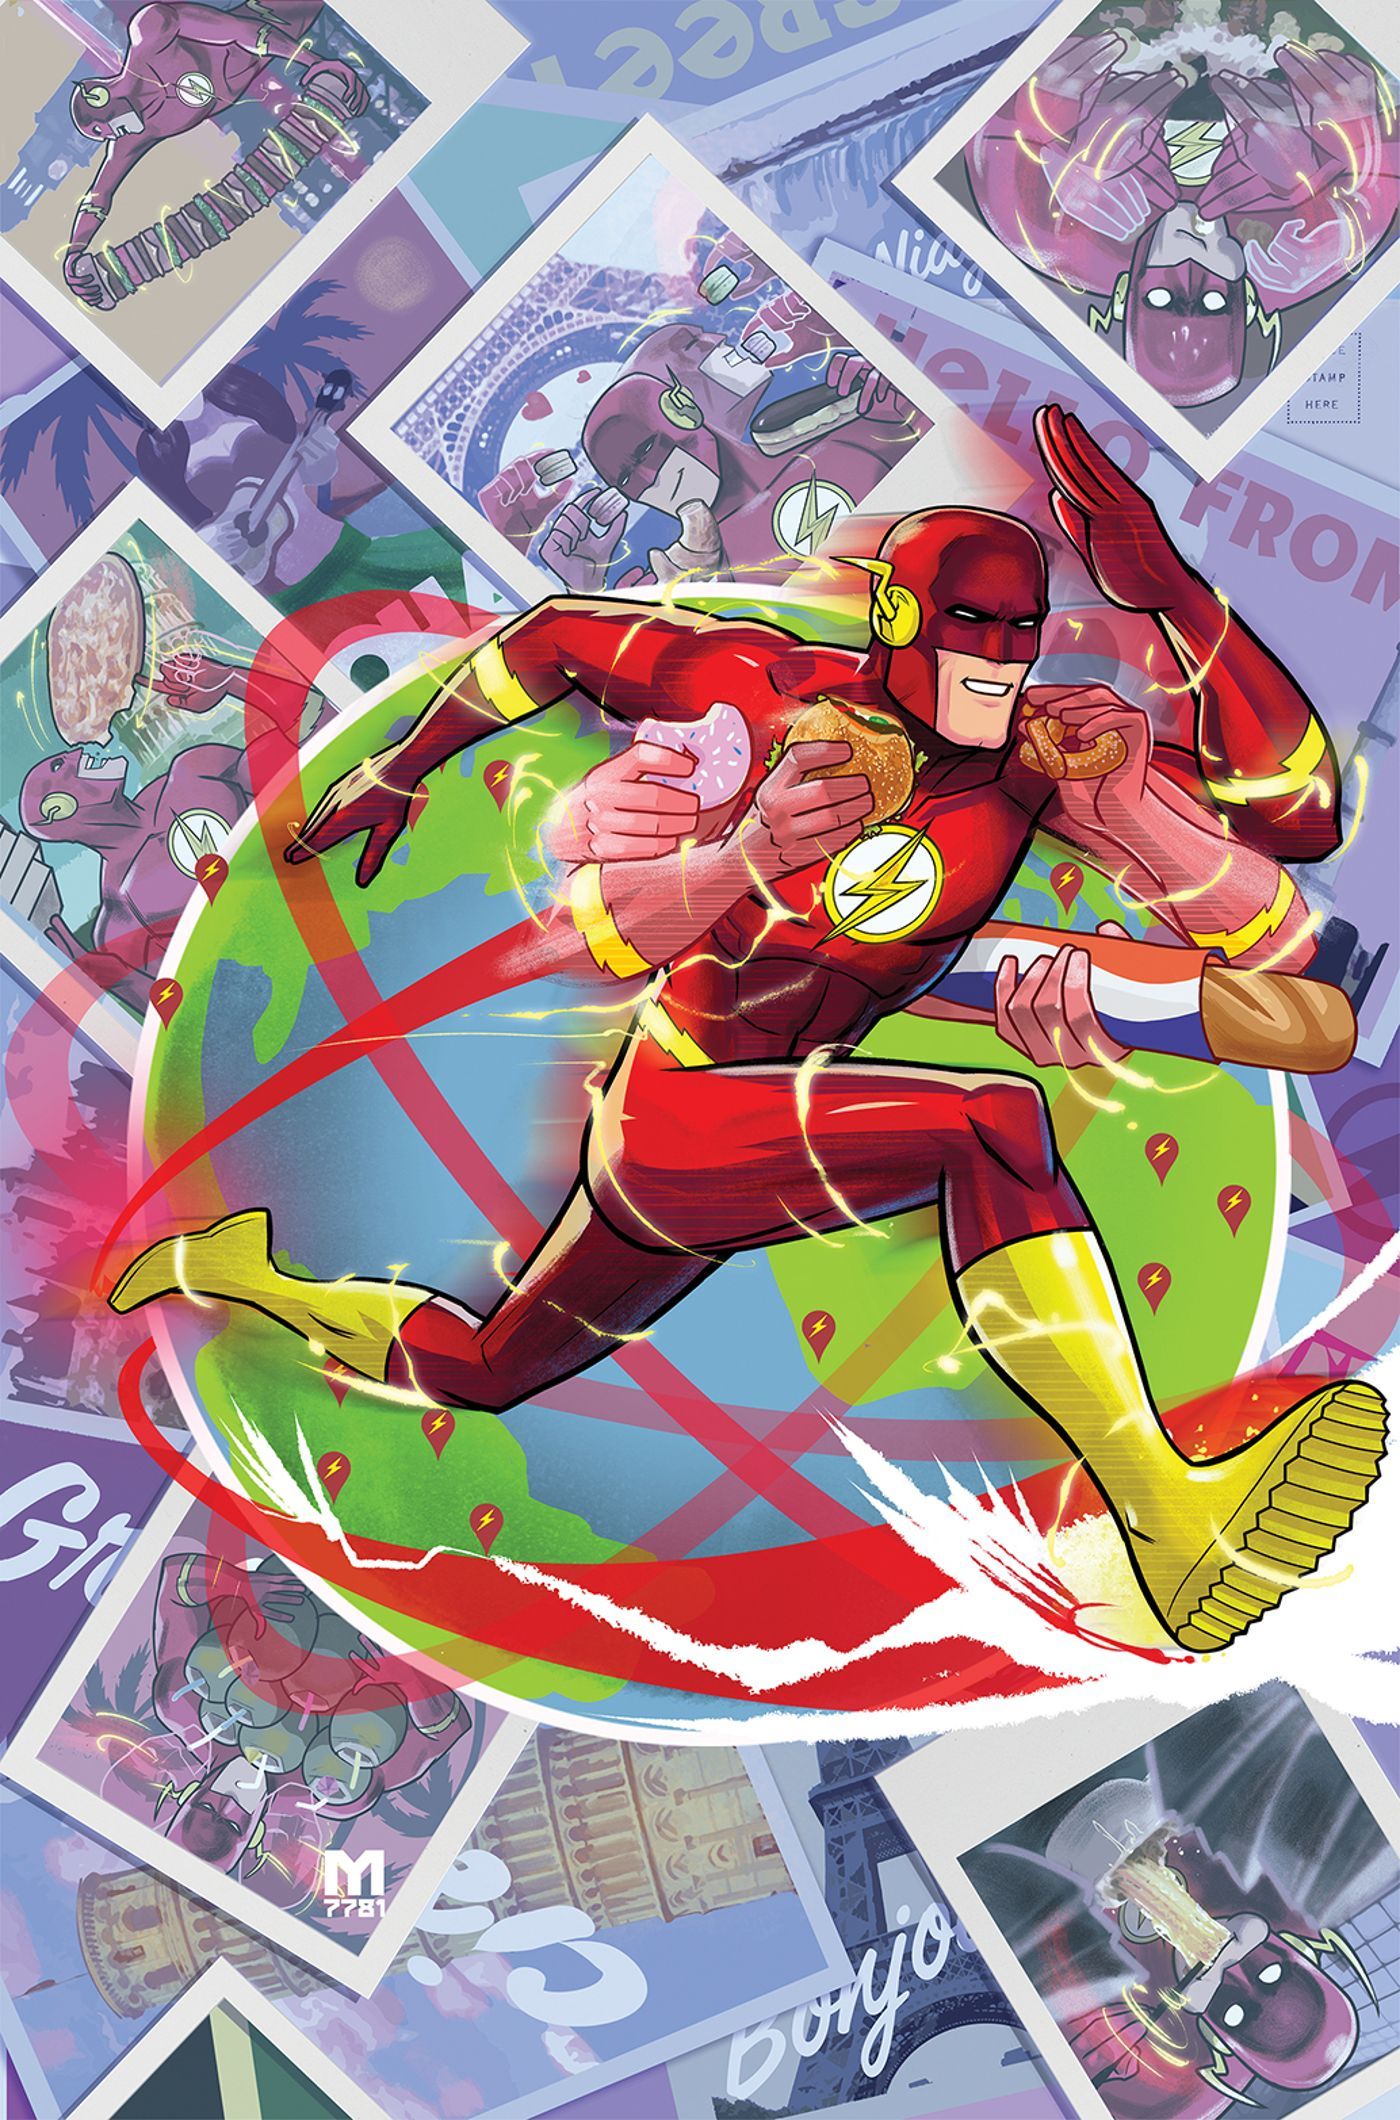 Flash Confirms How He Actually Powers His Superspeed